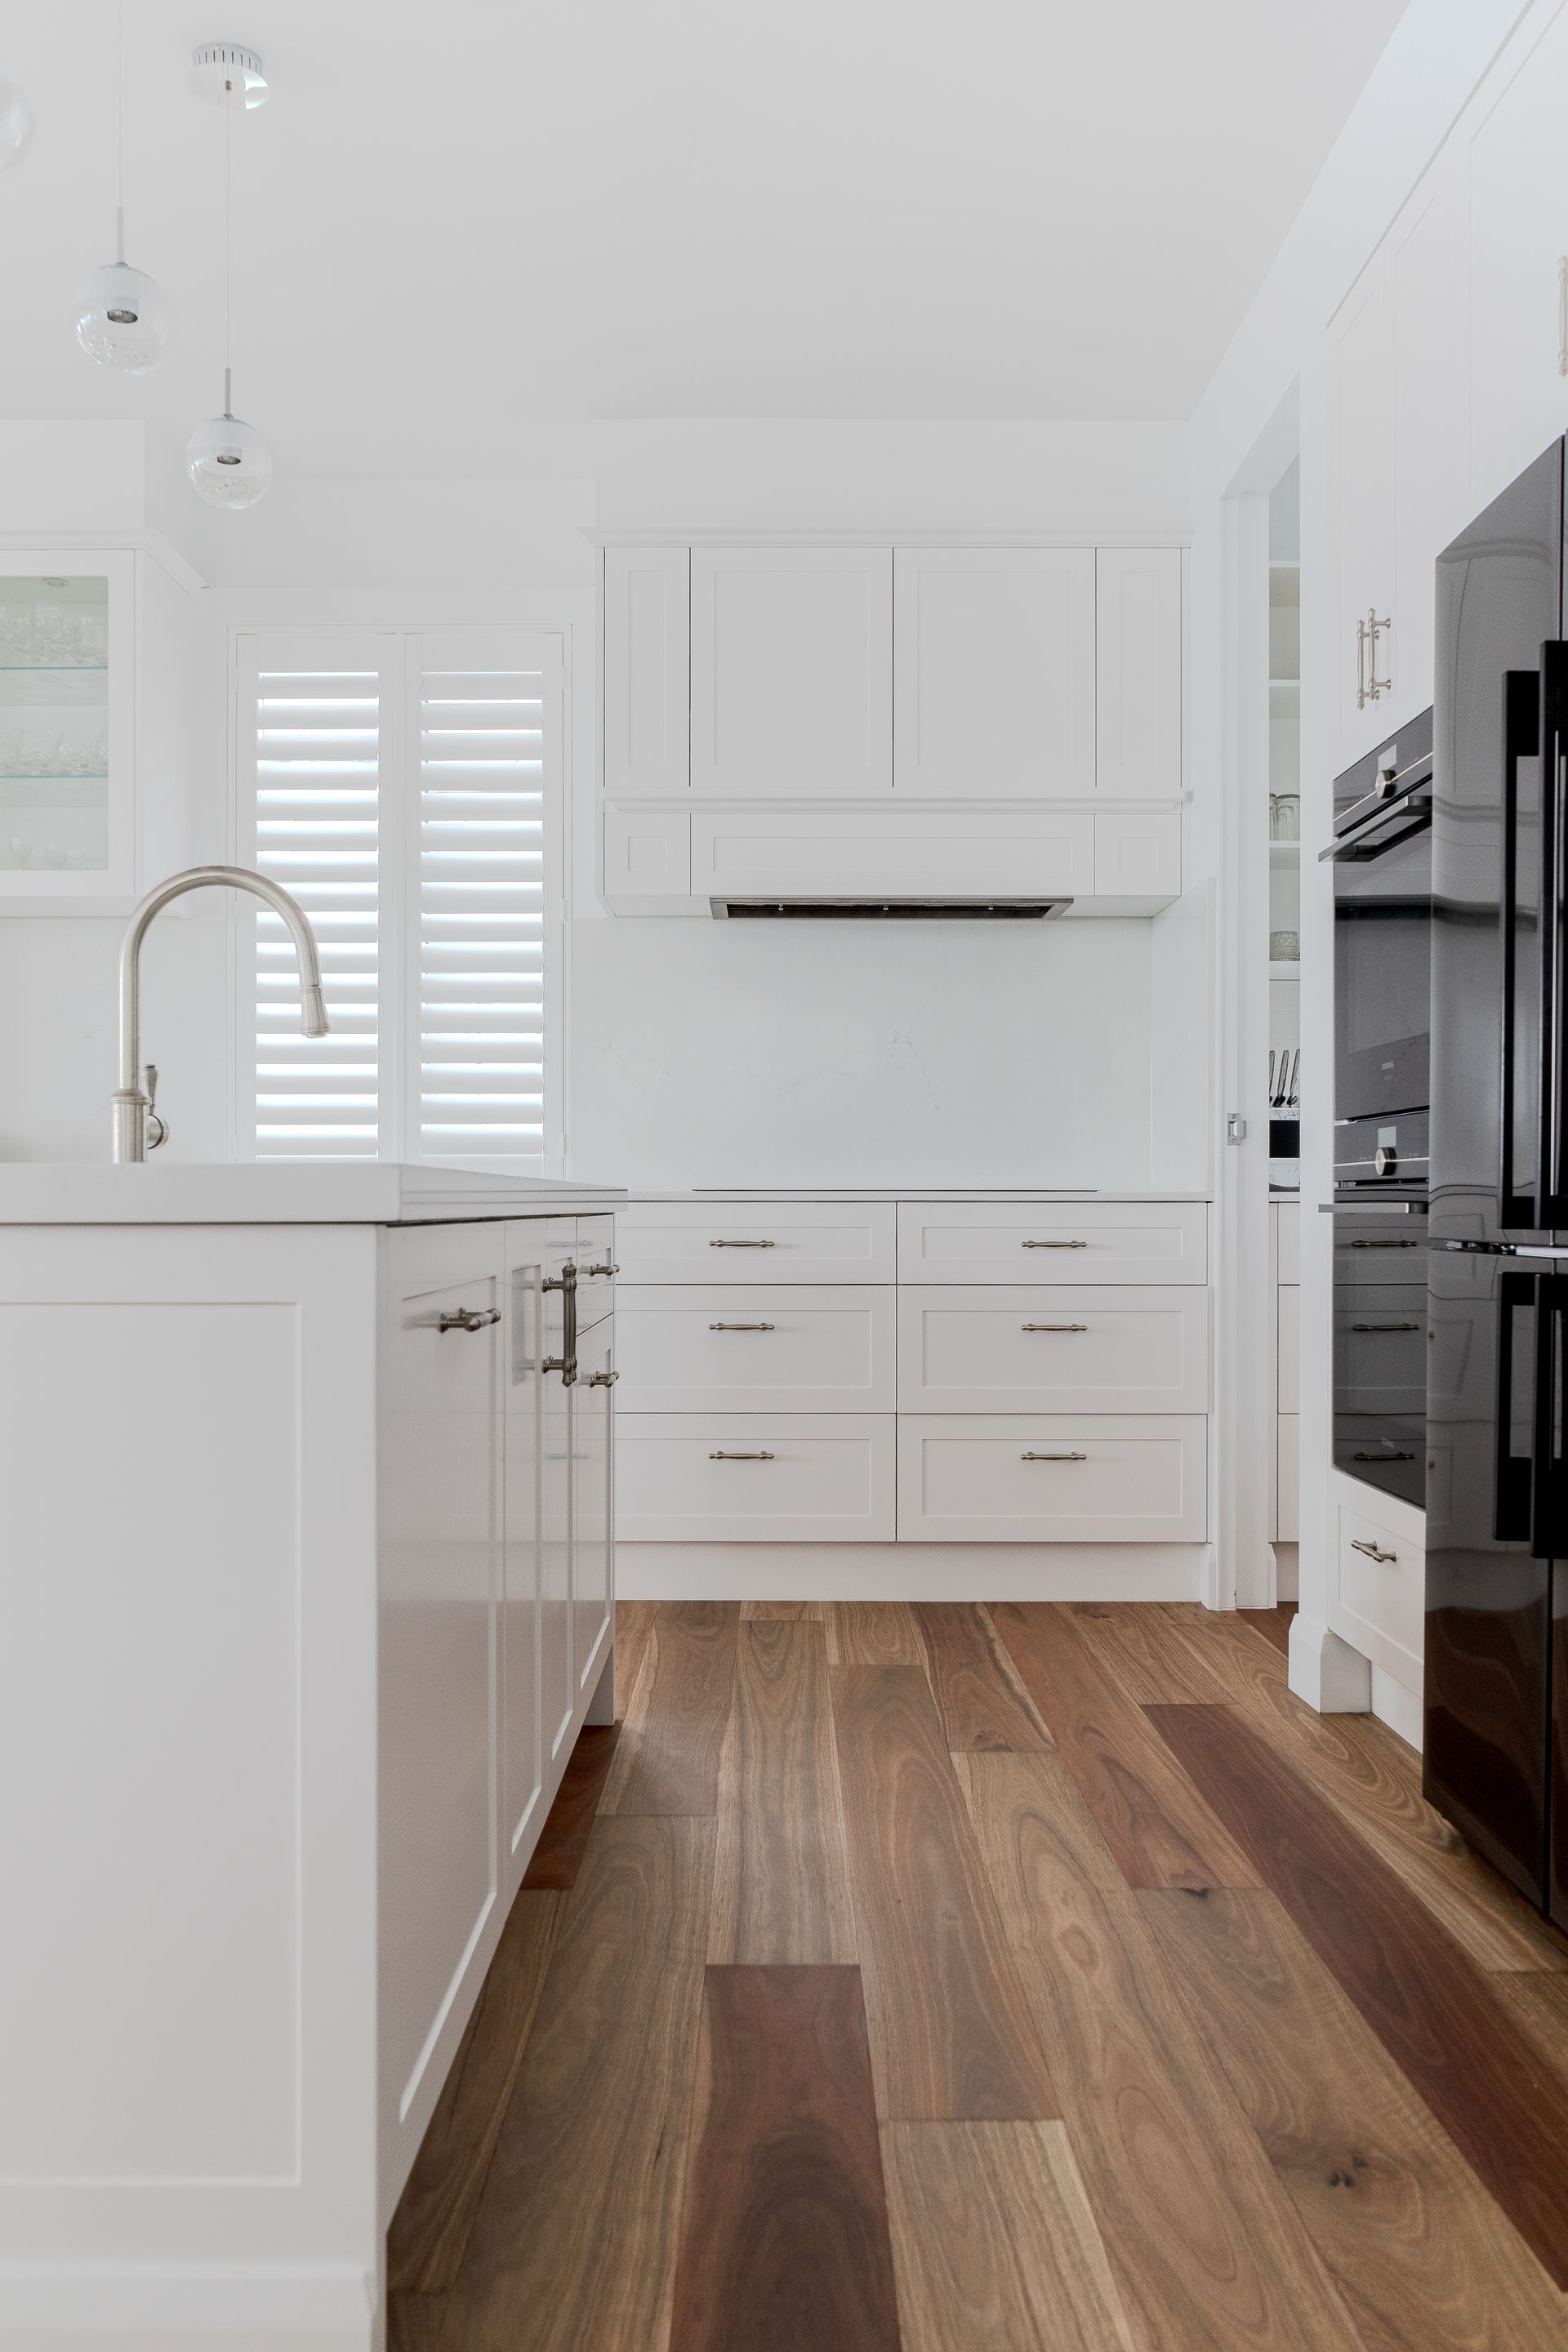 Intricate cabinet craftsmanship from kitchens Newcastle NSW, adding personalized charm to your culinary space.